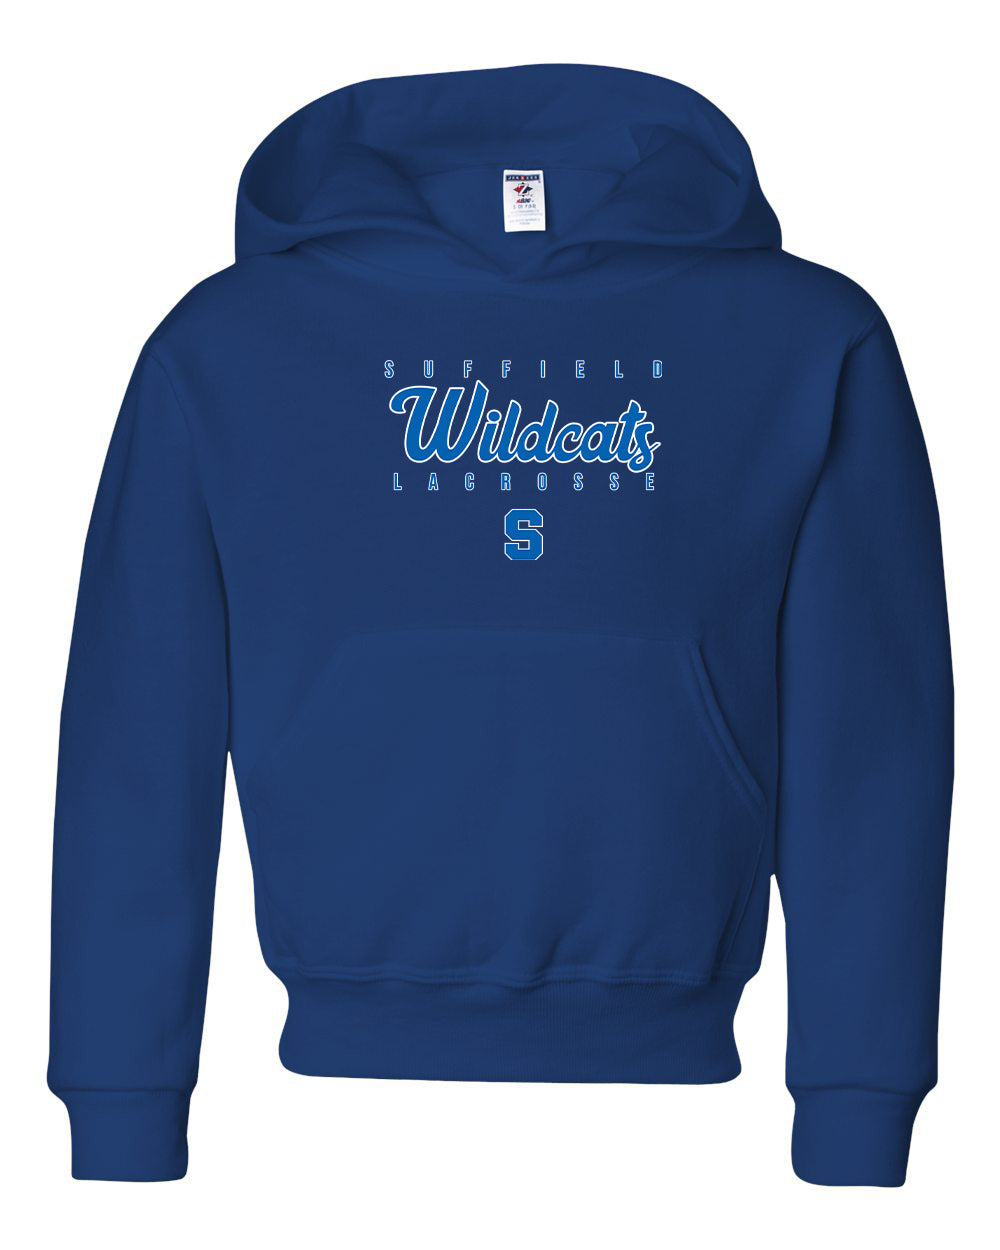 Suffield High Lacrosse - Youth Hoodie "SHL" - 996YR (color options available)